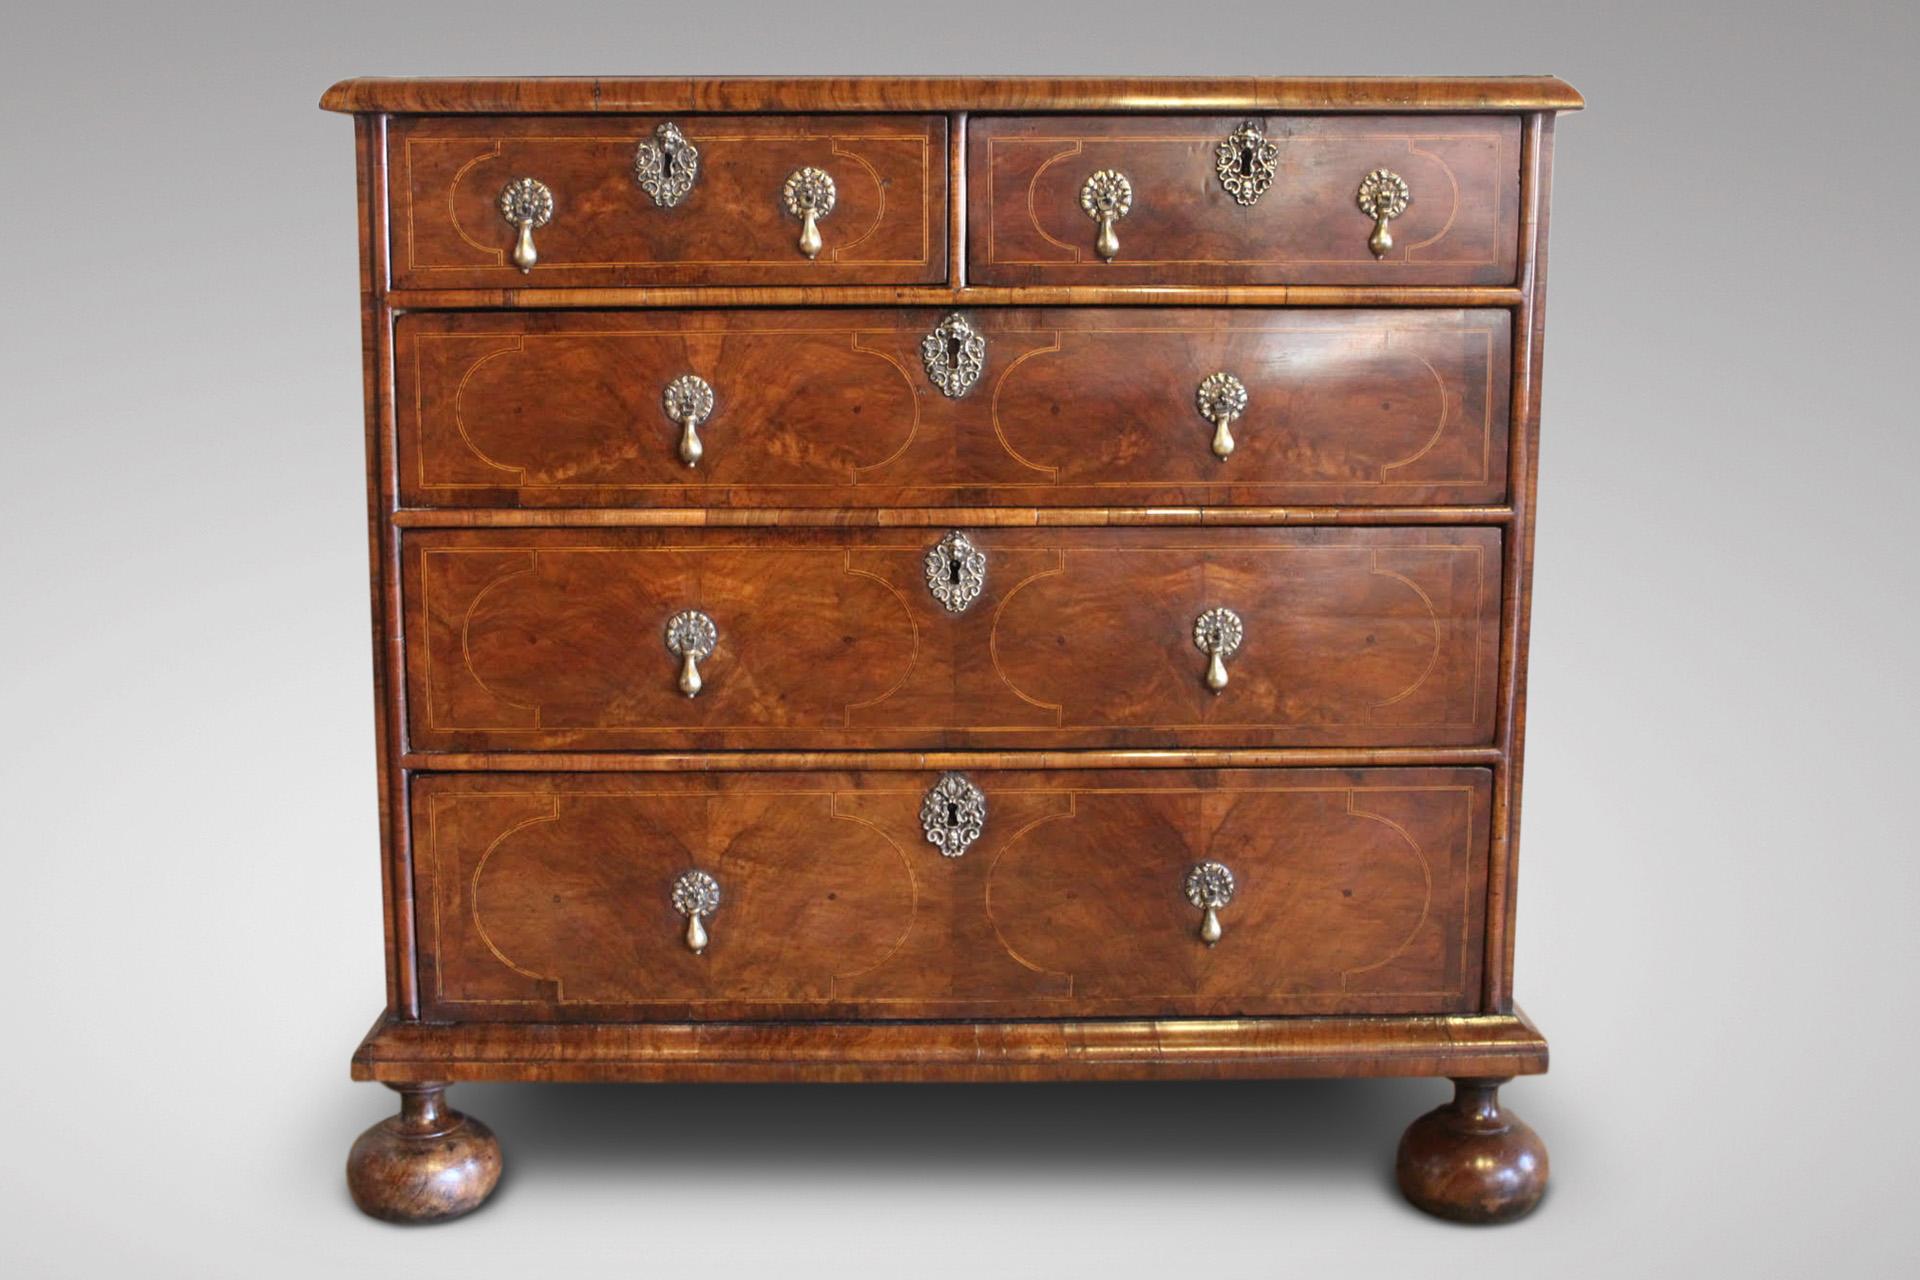 A very fine early 18th century, Queen Anne period walnut and oak with inlay chest of drawers of great colour & patina, moulded rectangular cross banded top above two short and three long graduated inlaid drawers, standing on original bun feet.